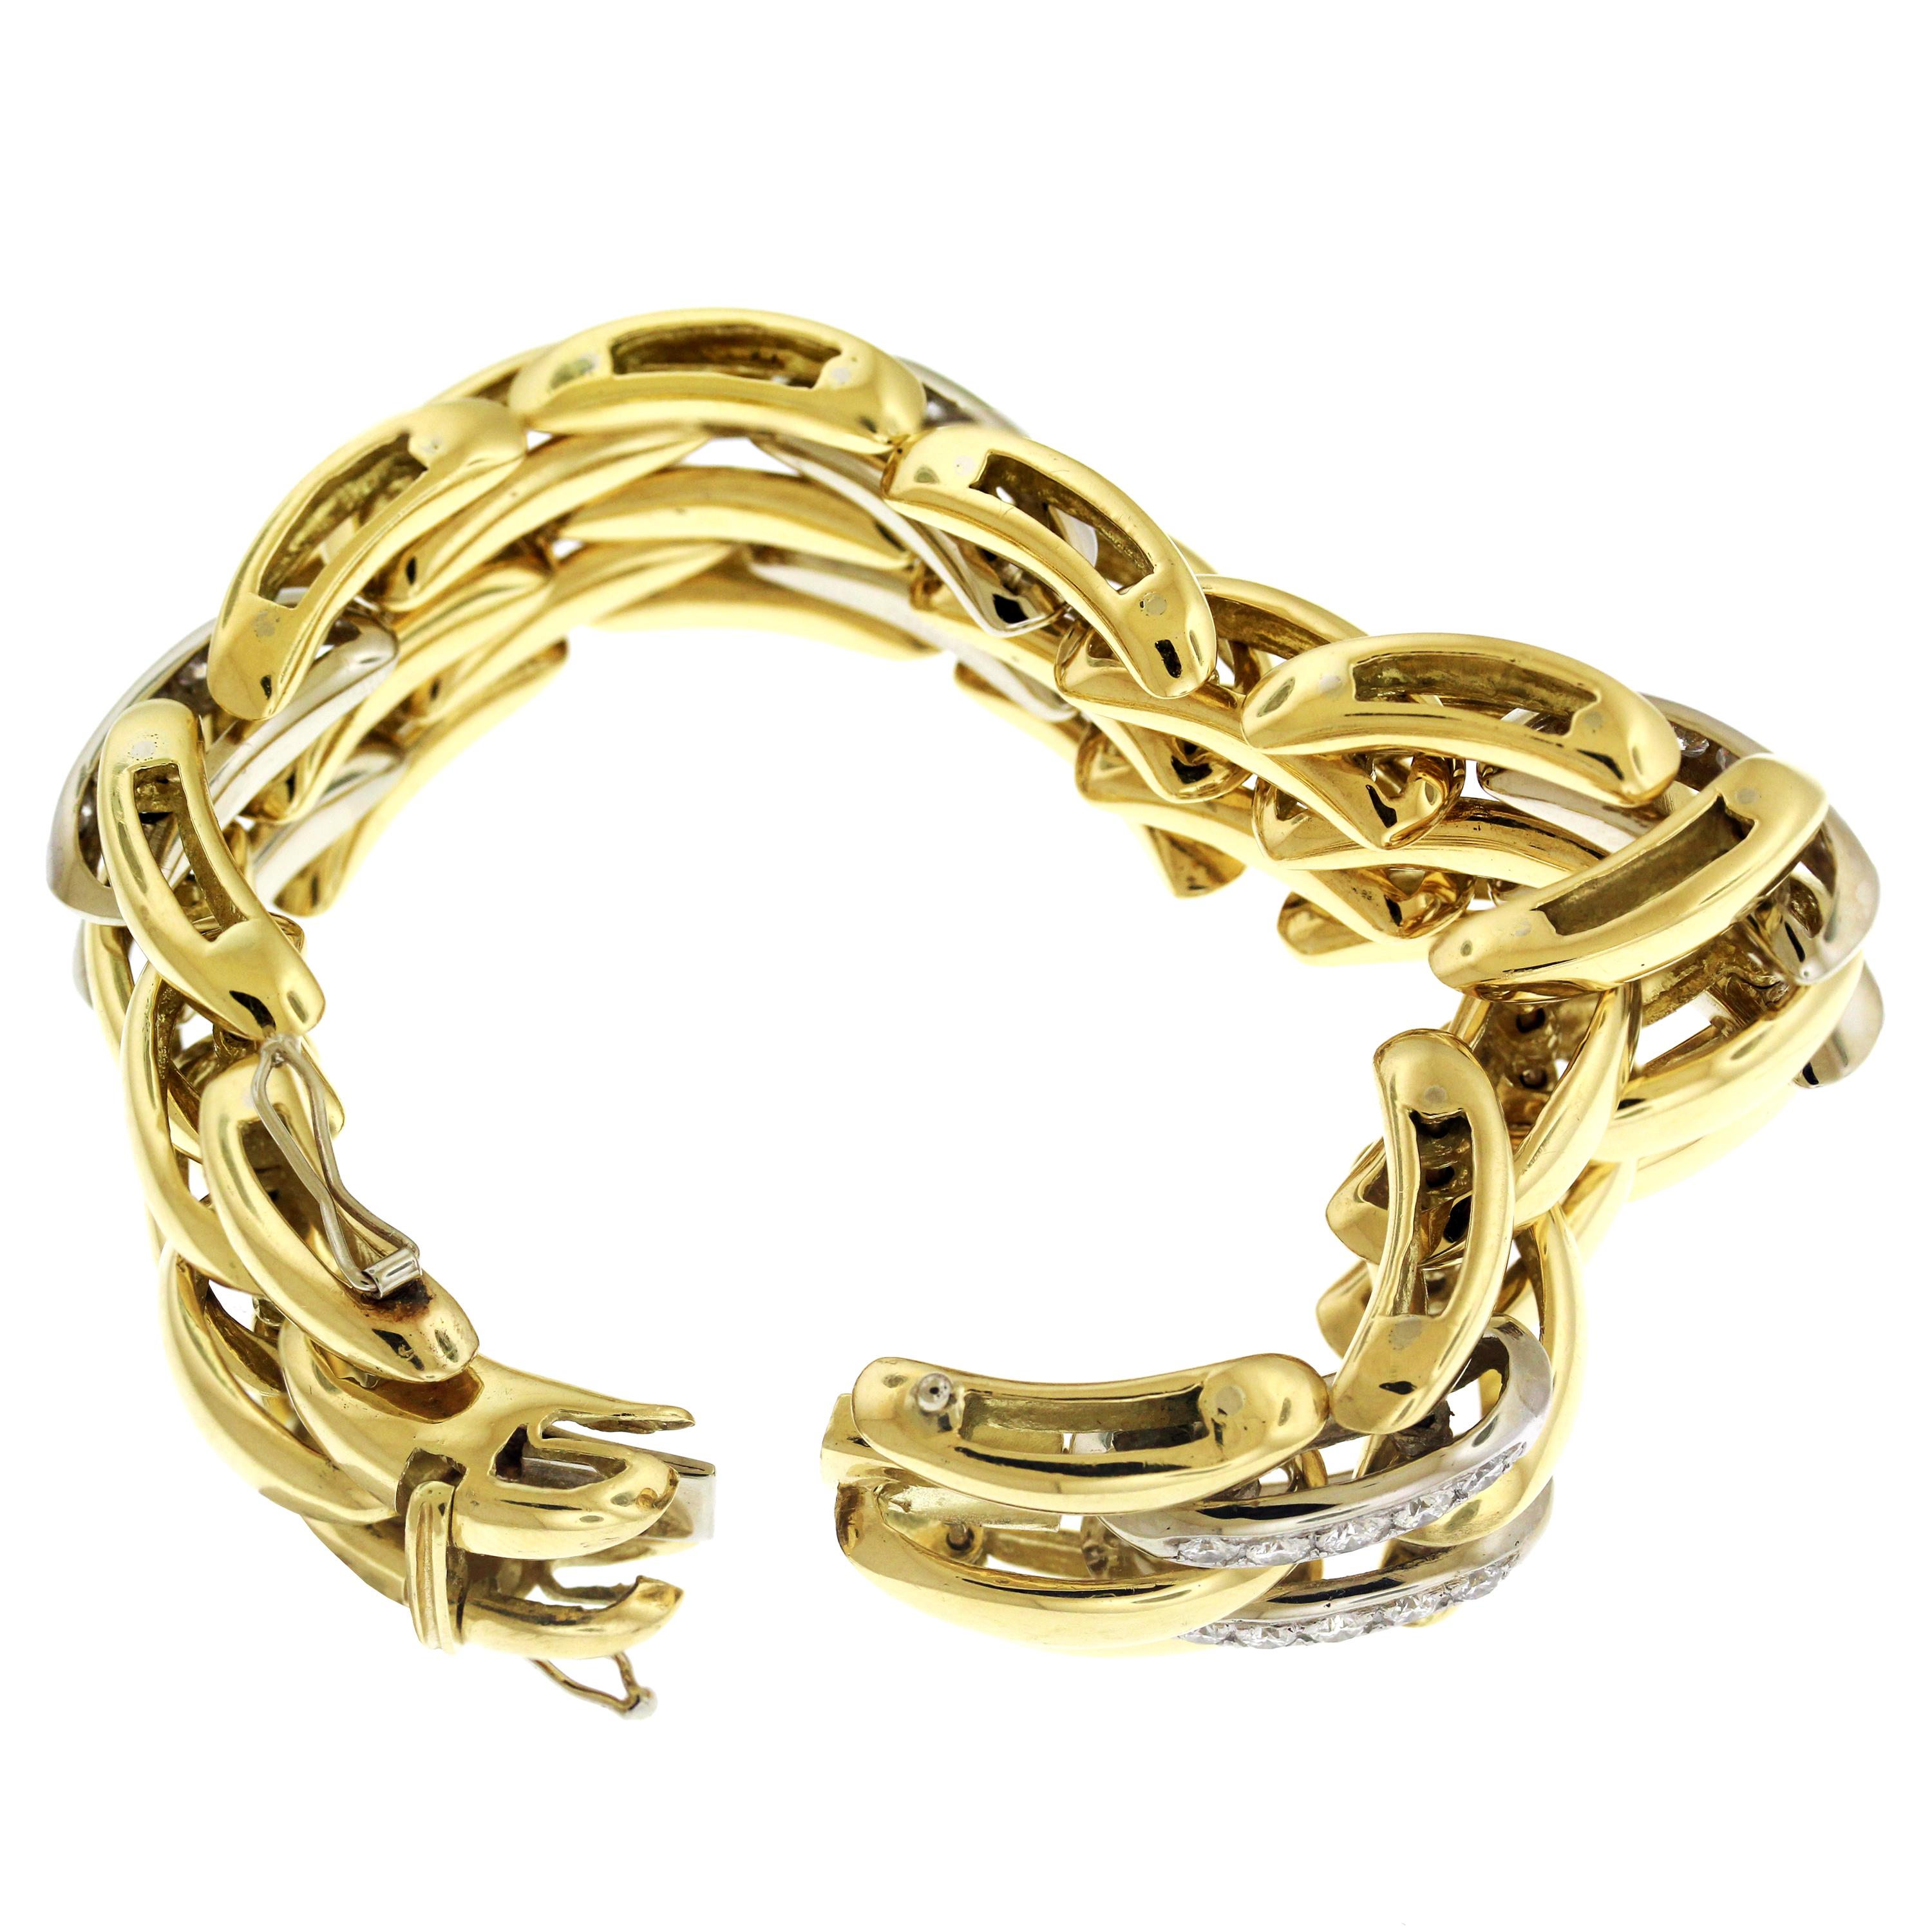 Women's Yellow Gold and Diamond Link Chain Bracelet Necklace Set